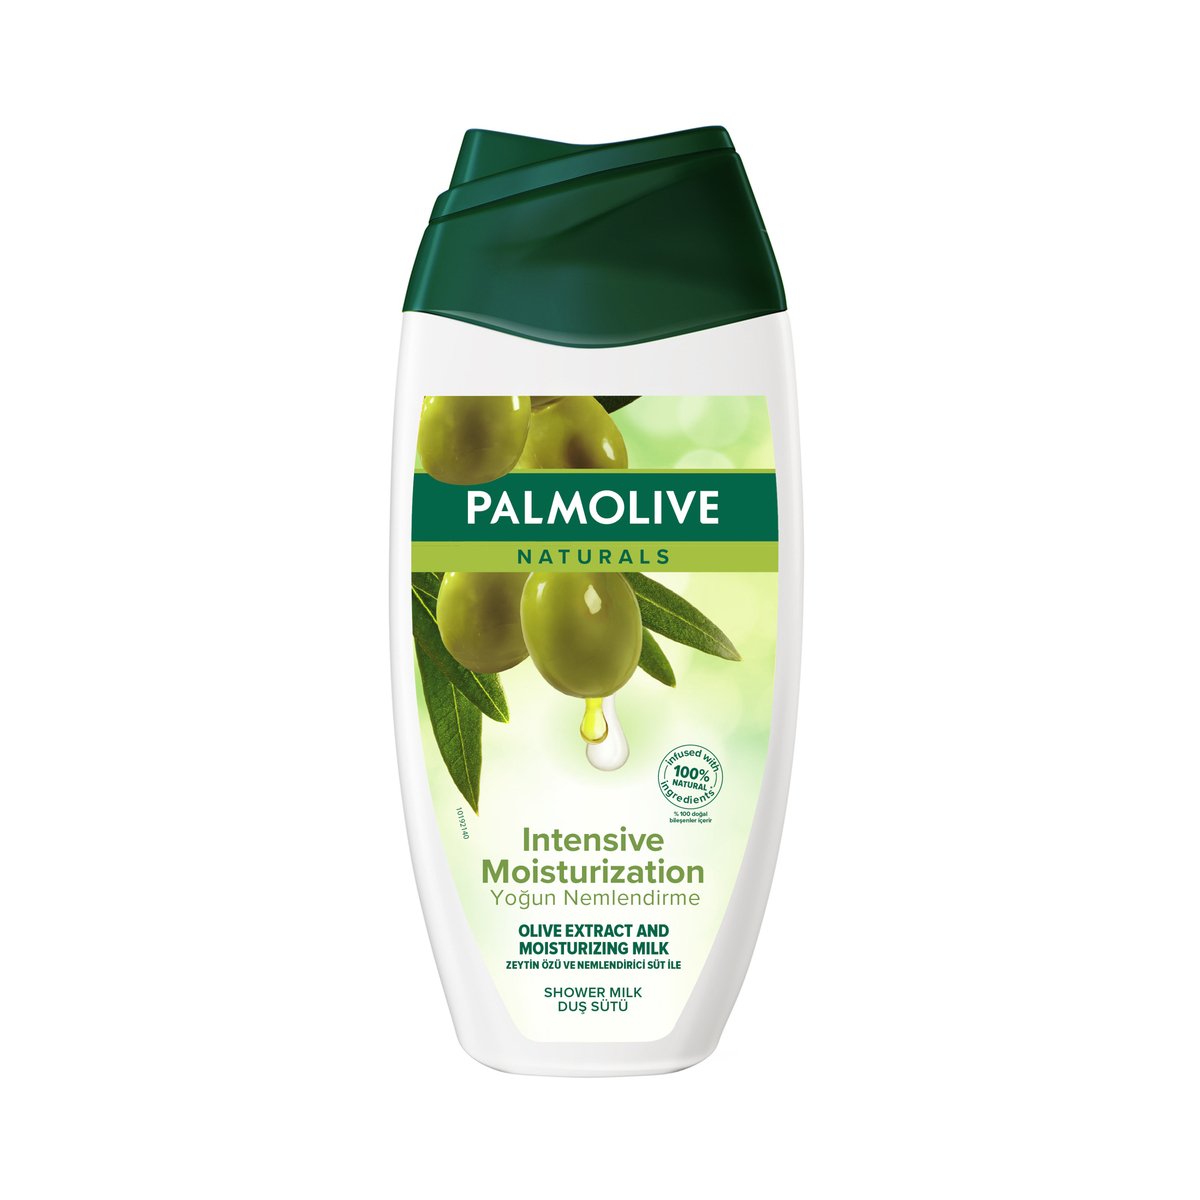 Palmolive Naturals Olive Extract and Moisturizing Shower Gel Milk Body Wash 500 ml